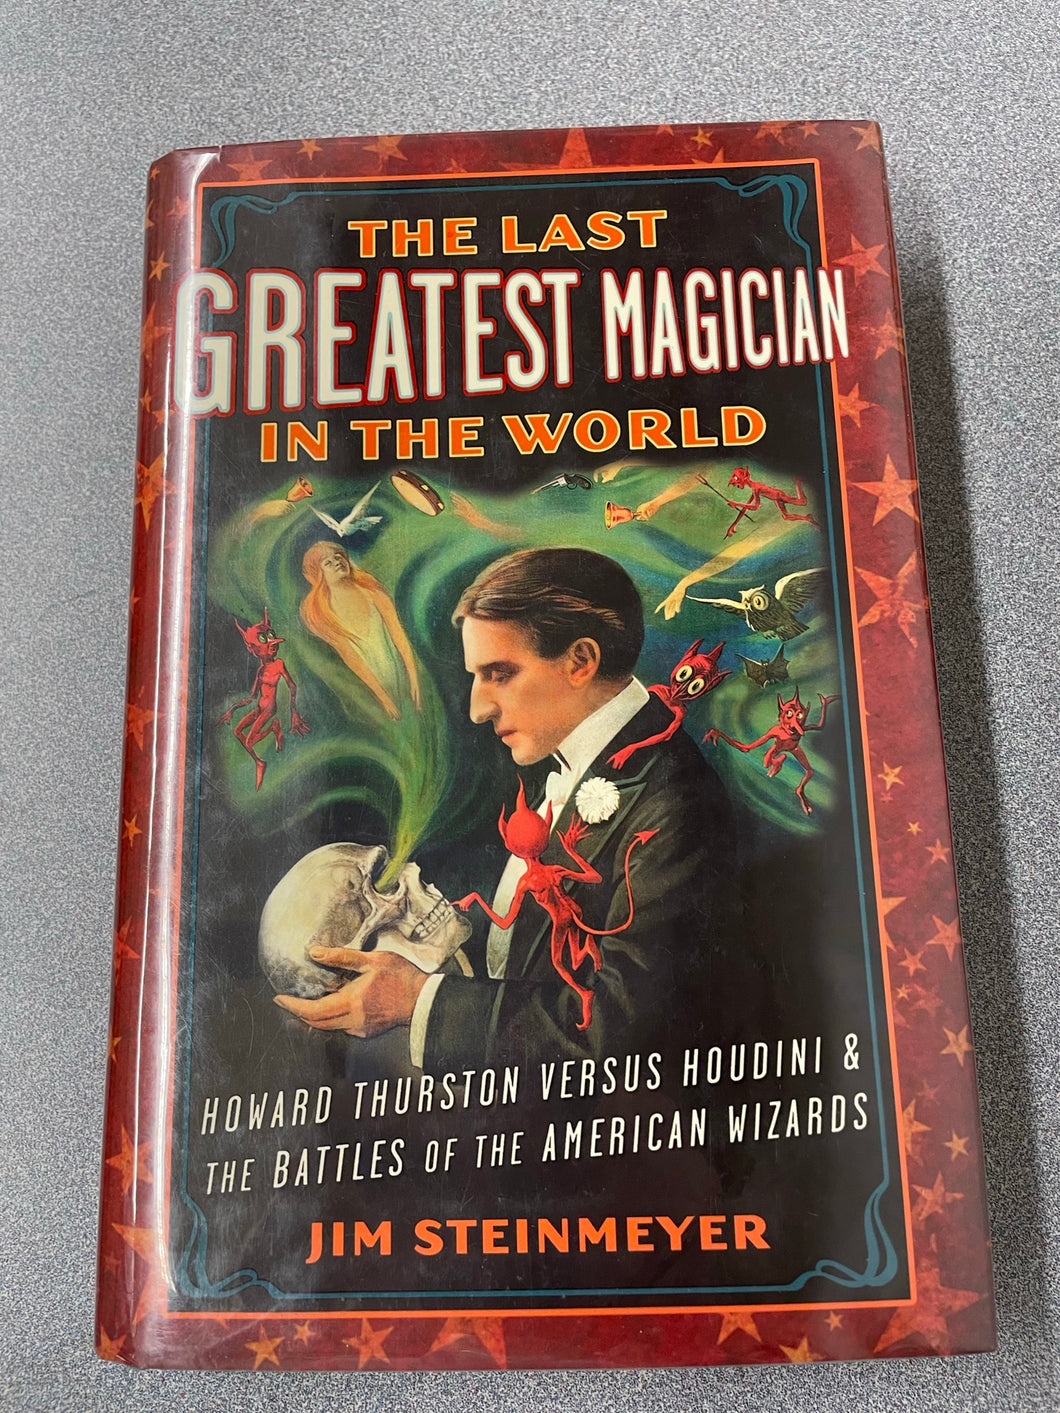 The Last Greatest Magician In the World: Howard Thurston Versus Houdini & the Battles of the American Wizards, Steinmeyer, Jim [2011] TS 11/22